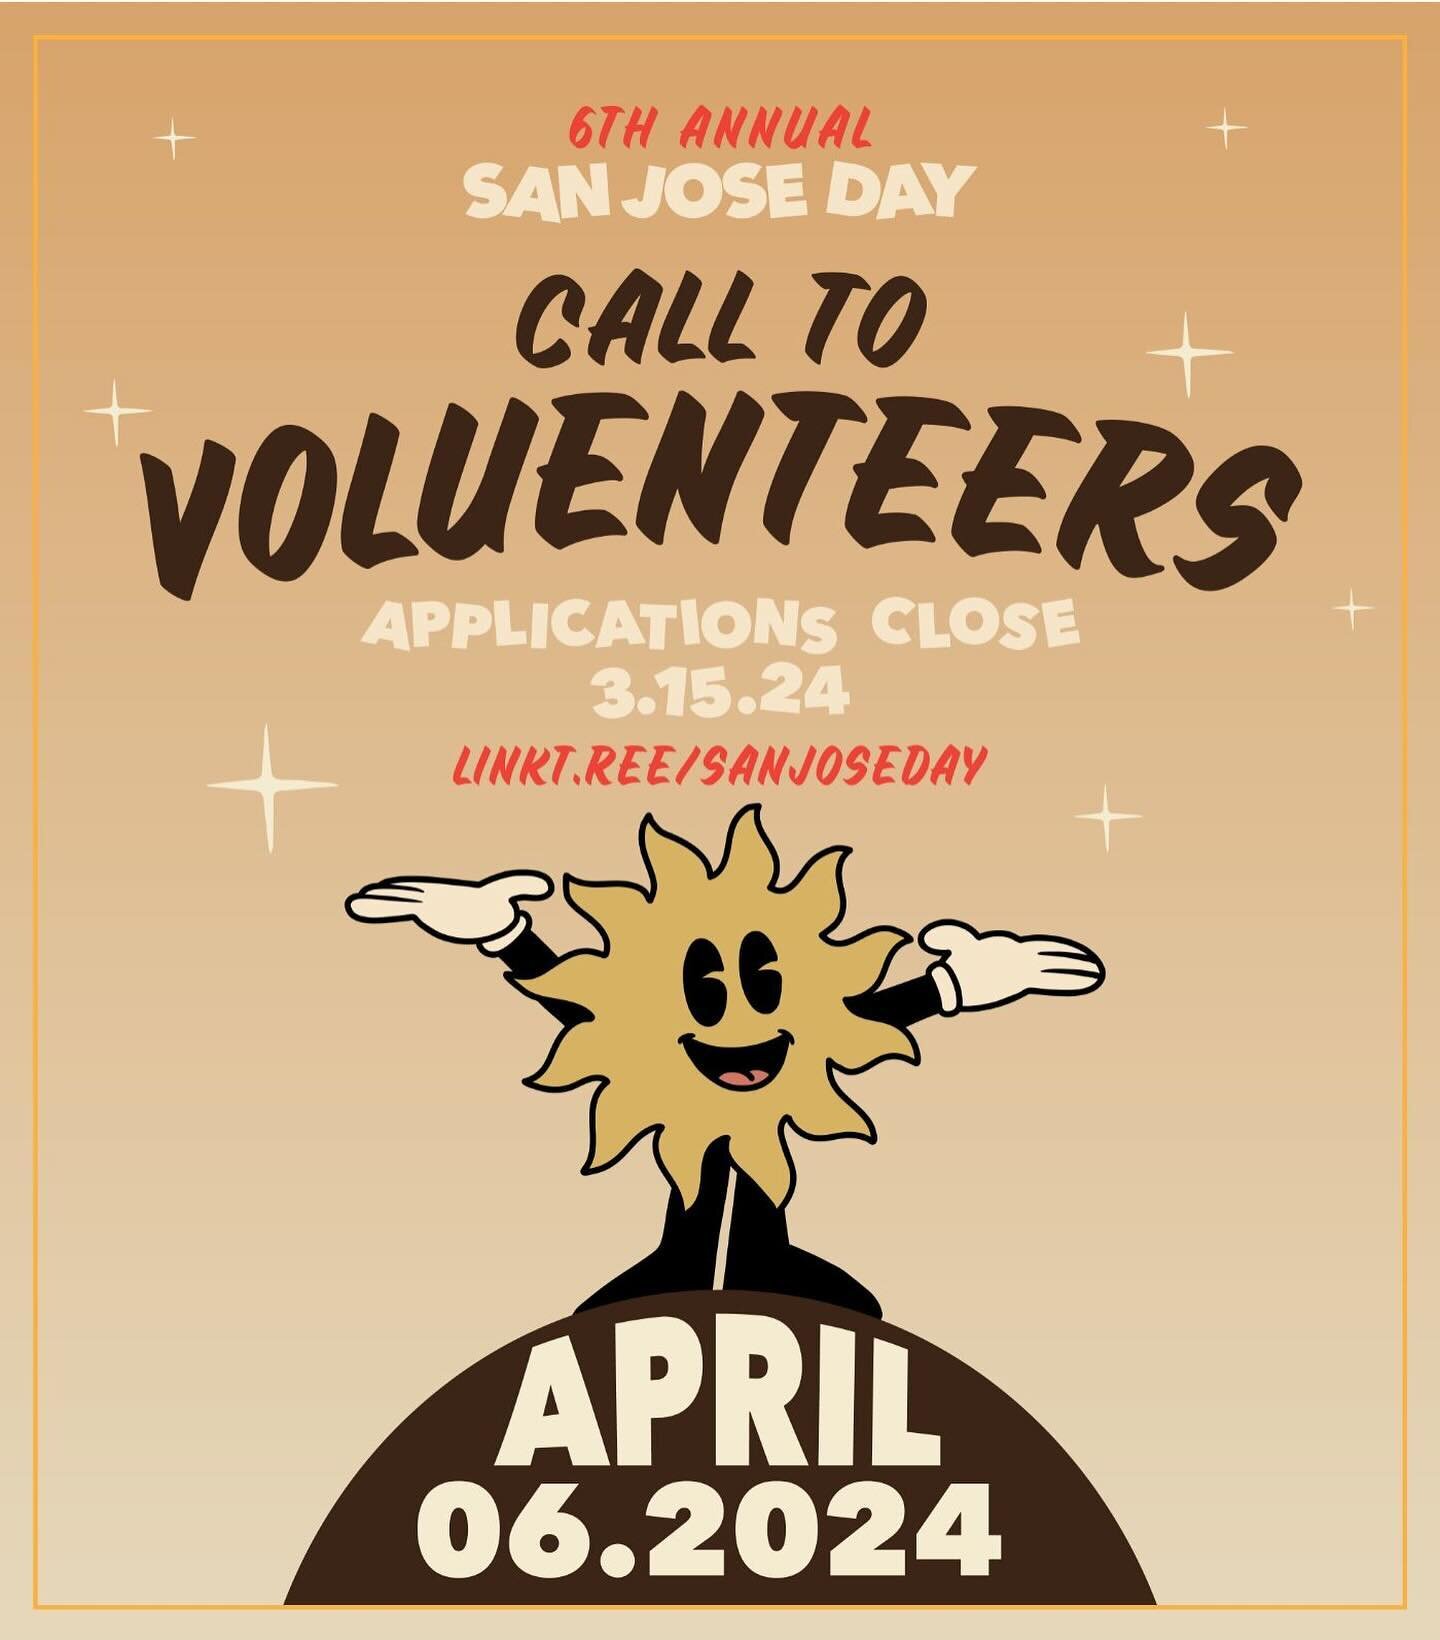 Hey San Jos&eacute;! We are looking for 20 event volunteers to support for 3 hours each at the 6th Annual San Jos&eacute; Day, Saturday April 6, 2024. 

We have a few special treats for our helpful friends 🎁 Gifts aside, volunteerism plays a very im